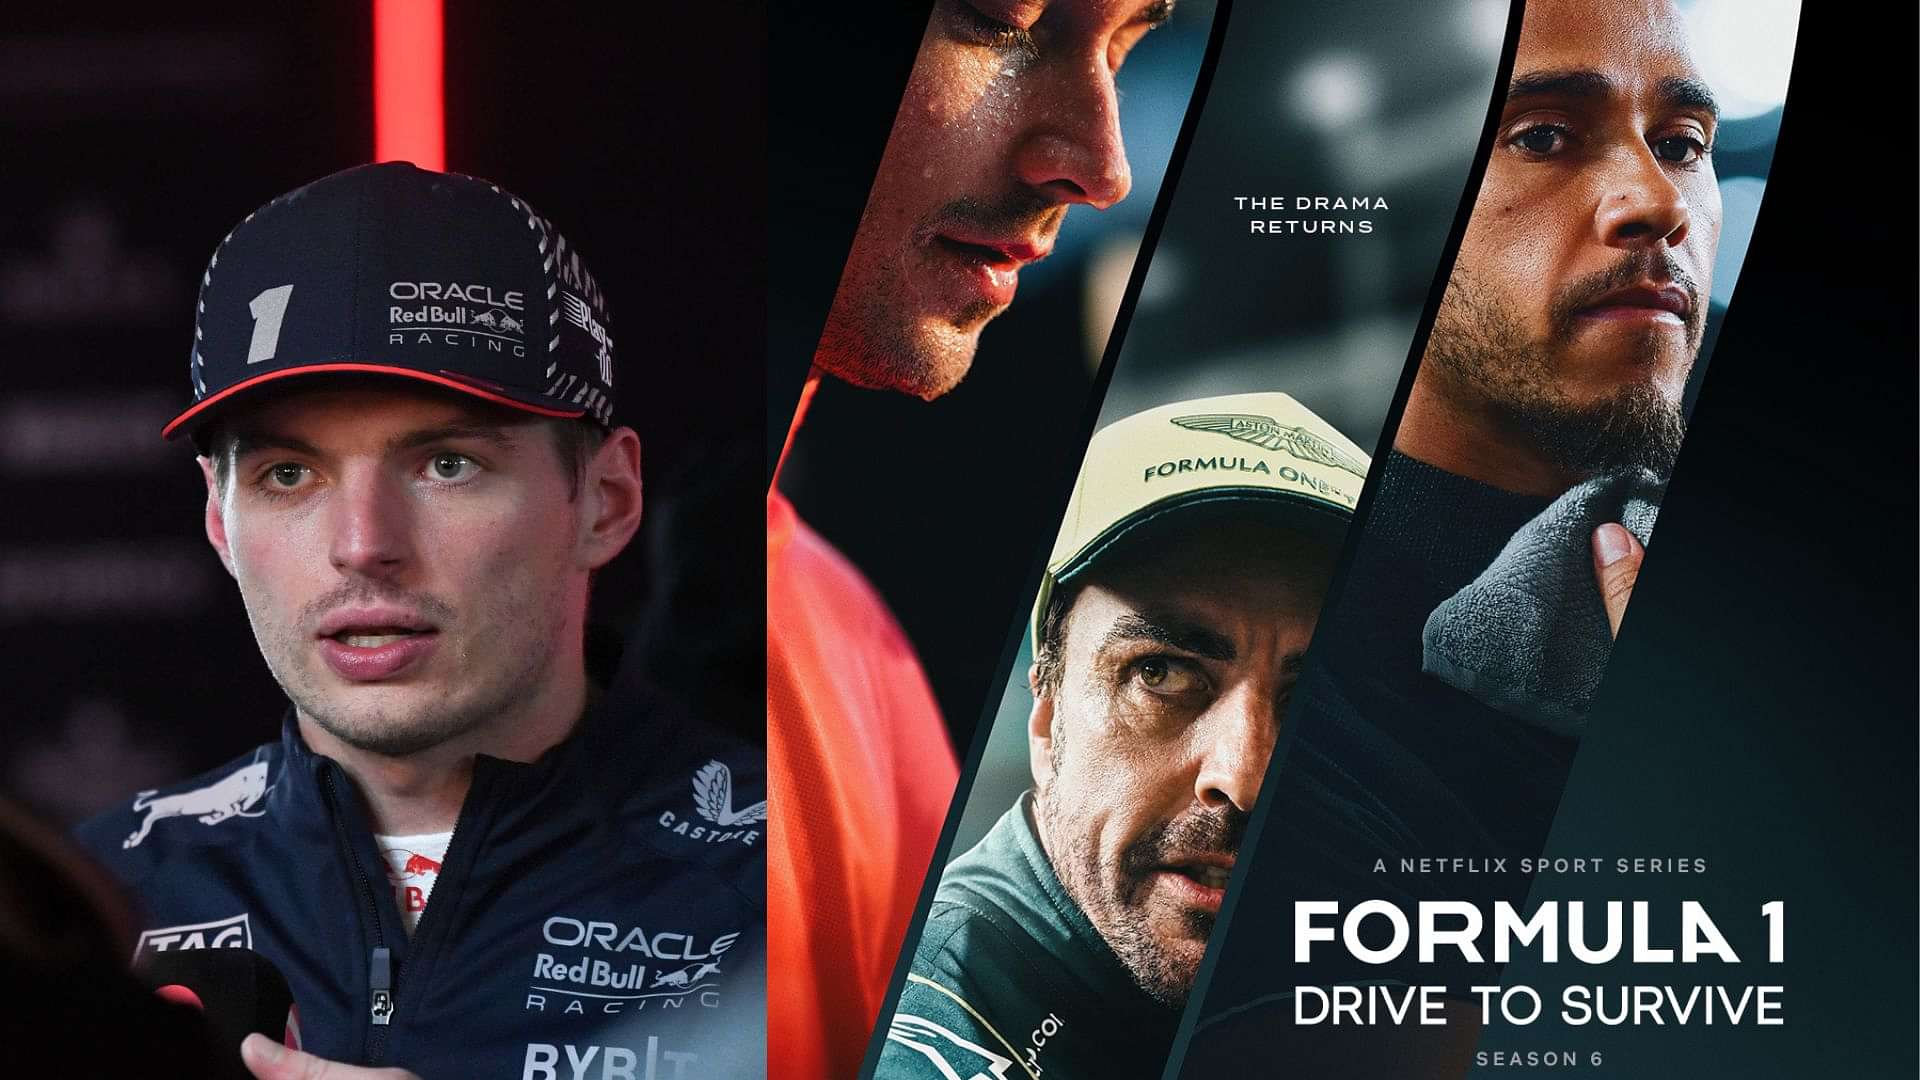 Max Verstappen’s Glaring Absence From Drive to Survive Trailer Raises Concerns: “Wtf Is DTS Gonna Do?”